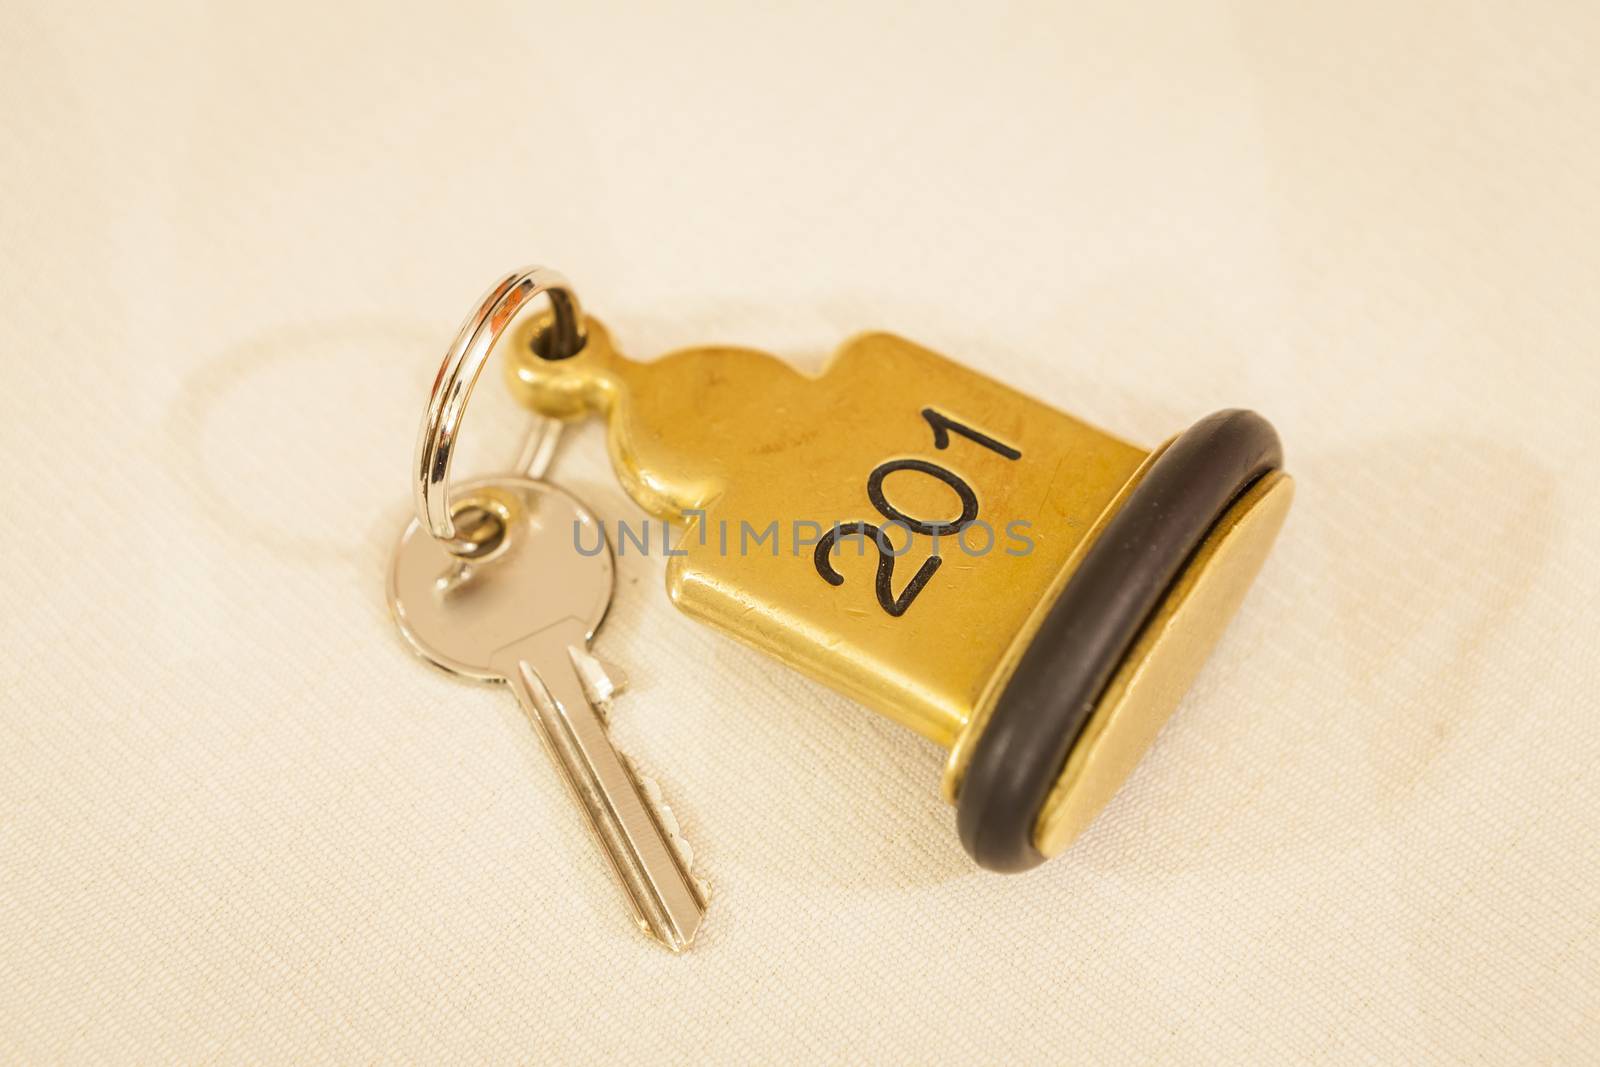 Hotel Room Key lying on Bed with keyring golden